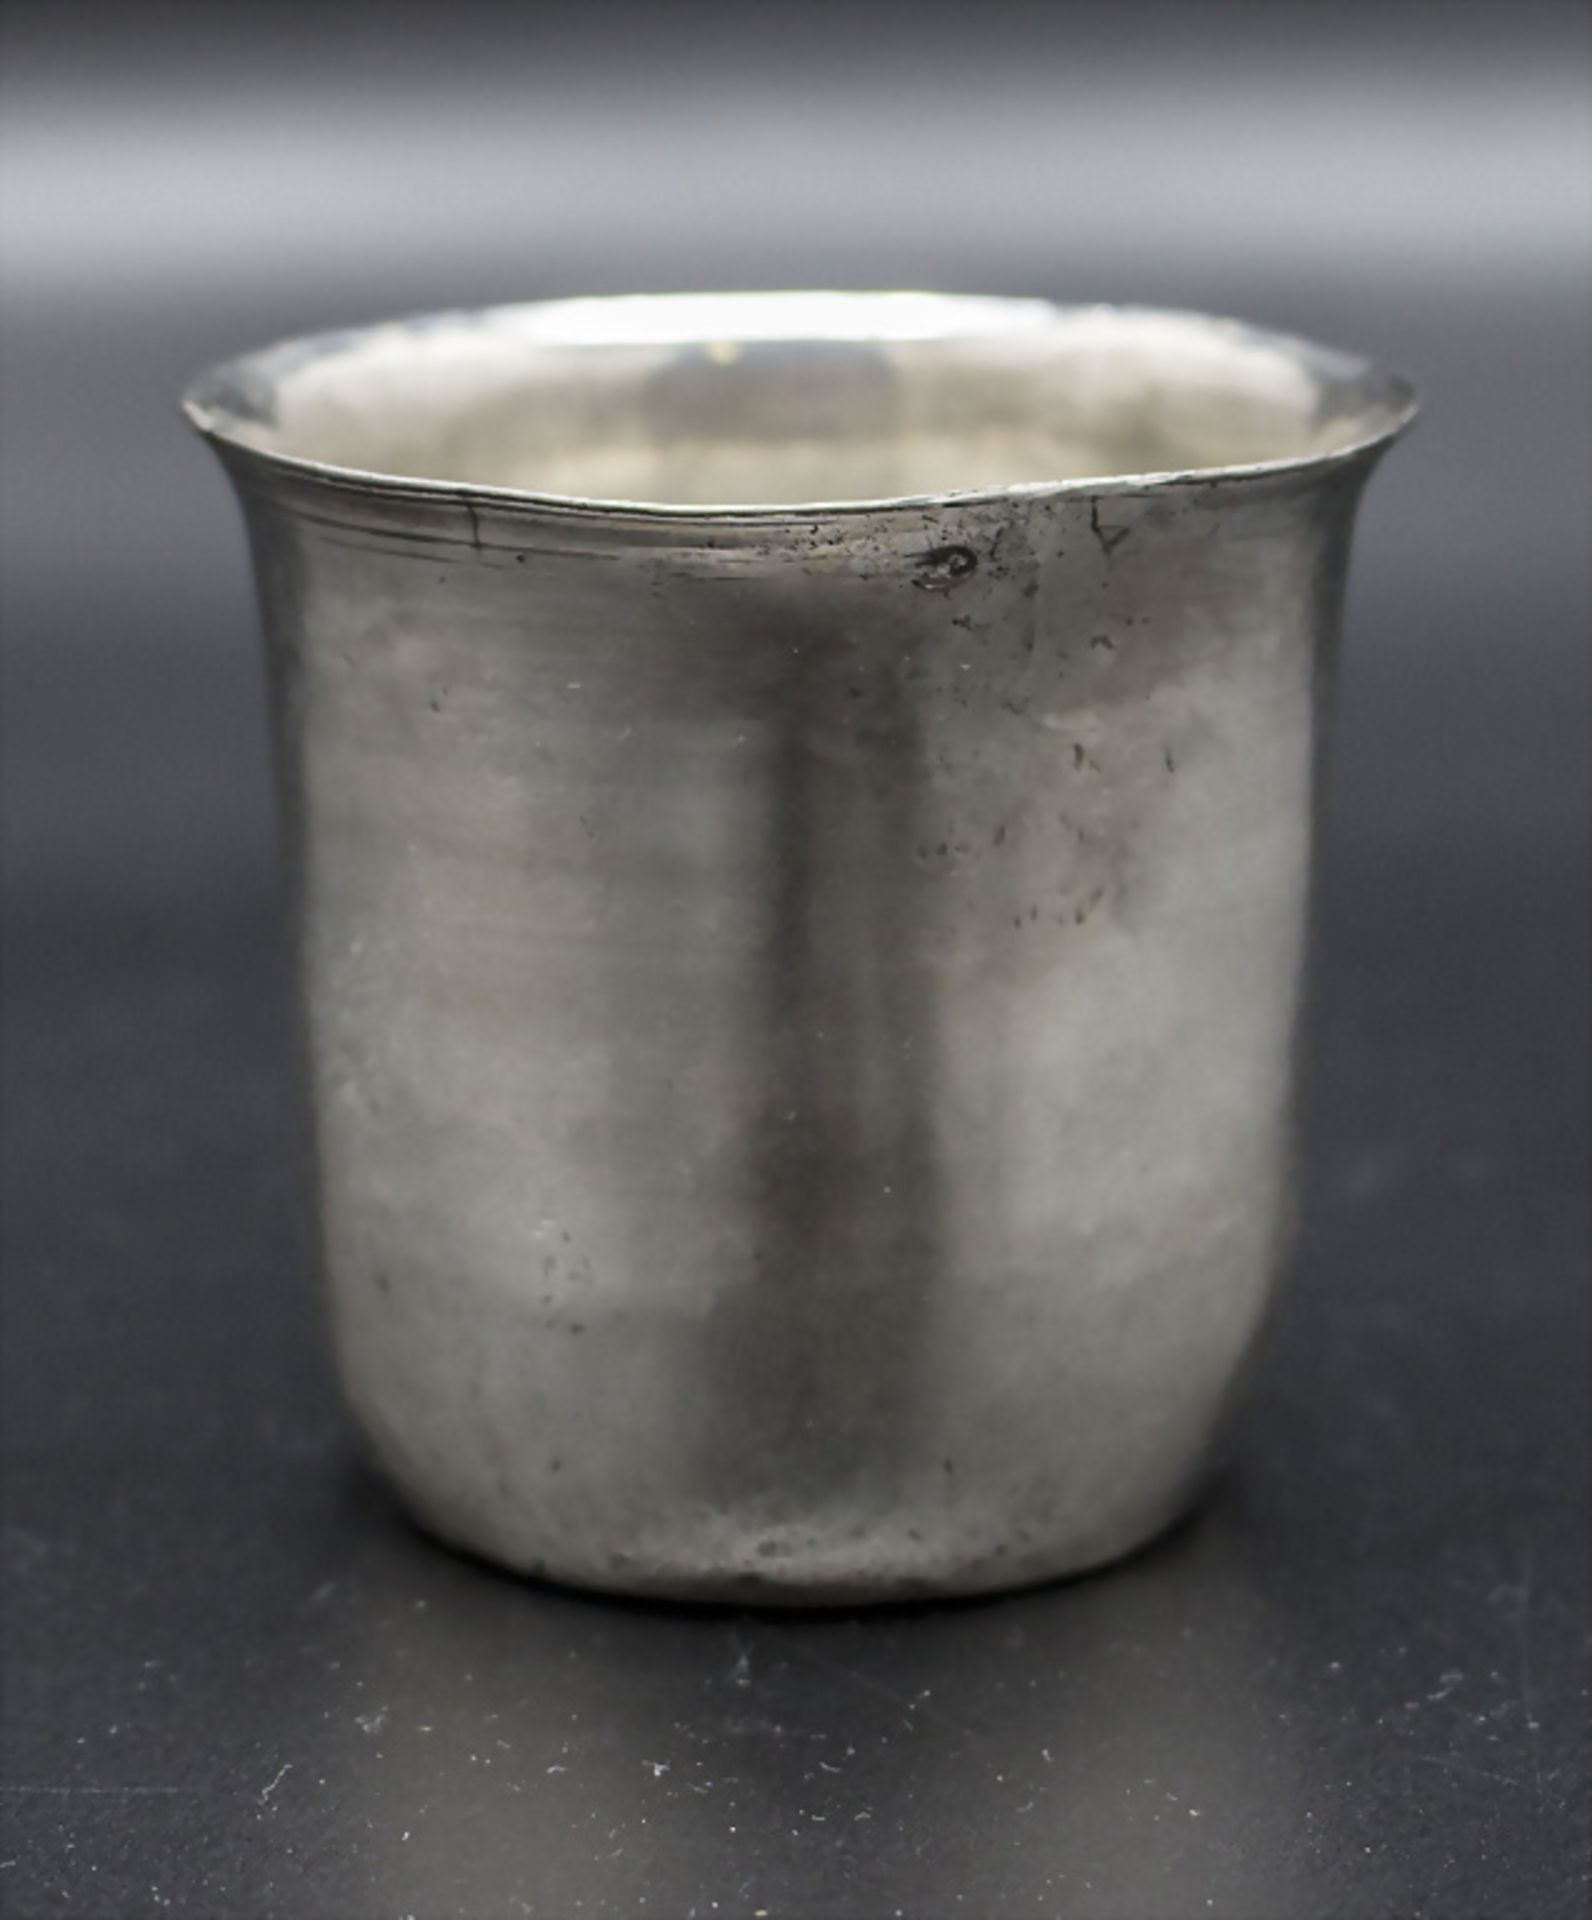 Faustbecher / A silver beaker / Une timbale en argent, Châlons-en-Champagne (Reims), Anfang 18. Jh. - Image 2 of 3